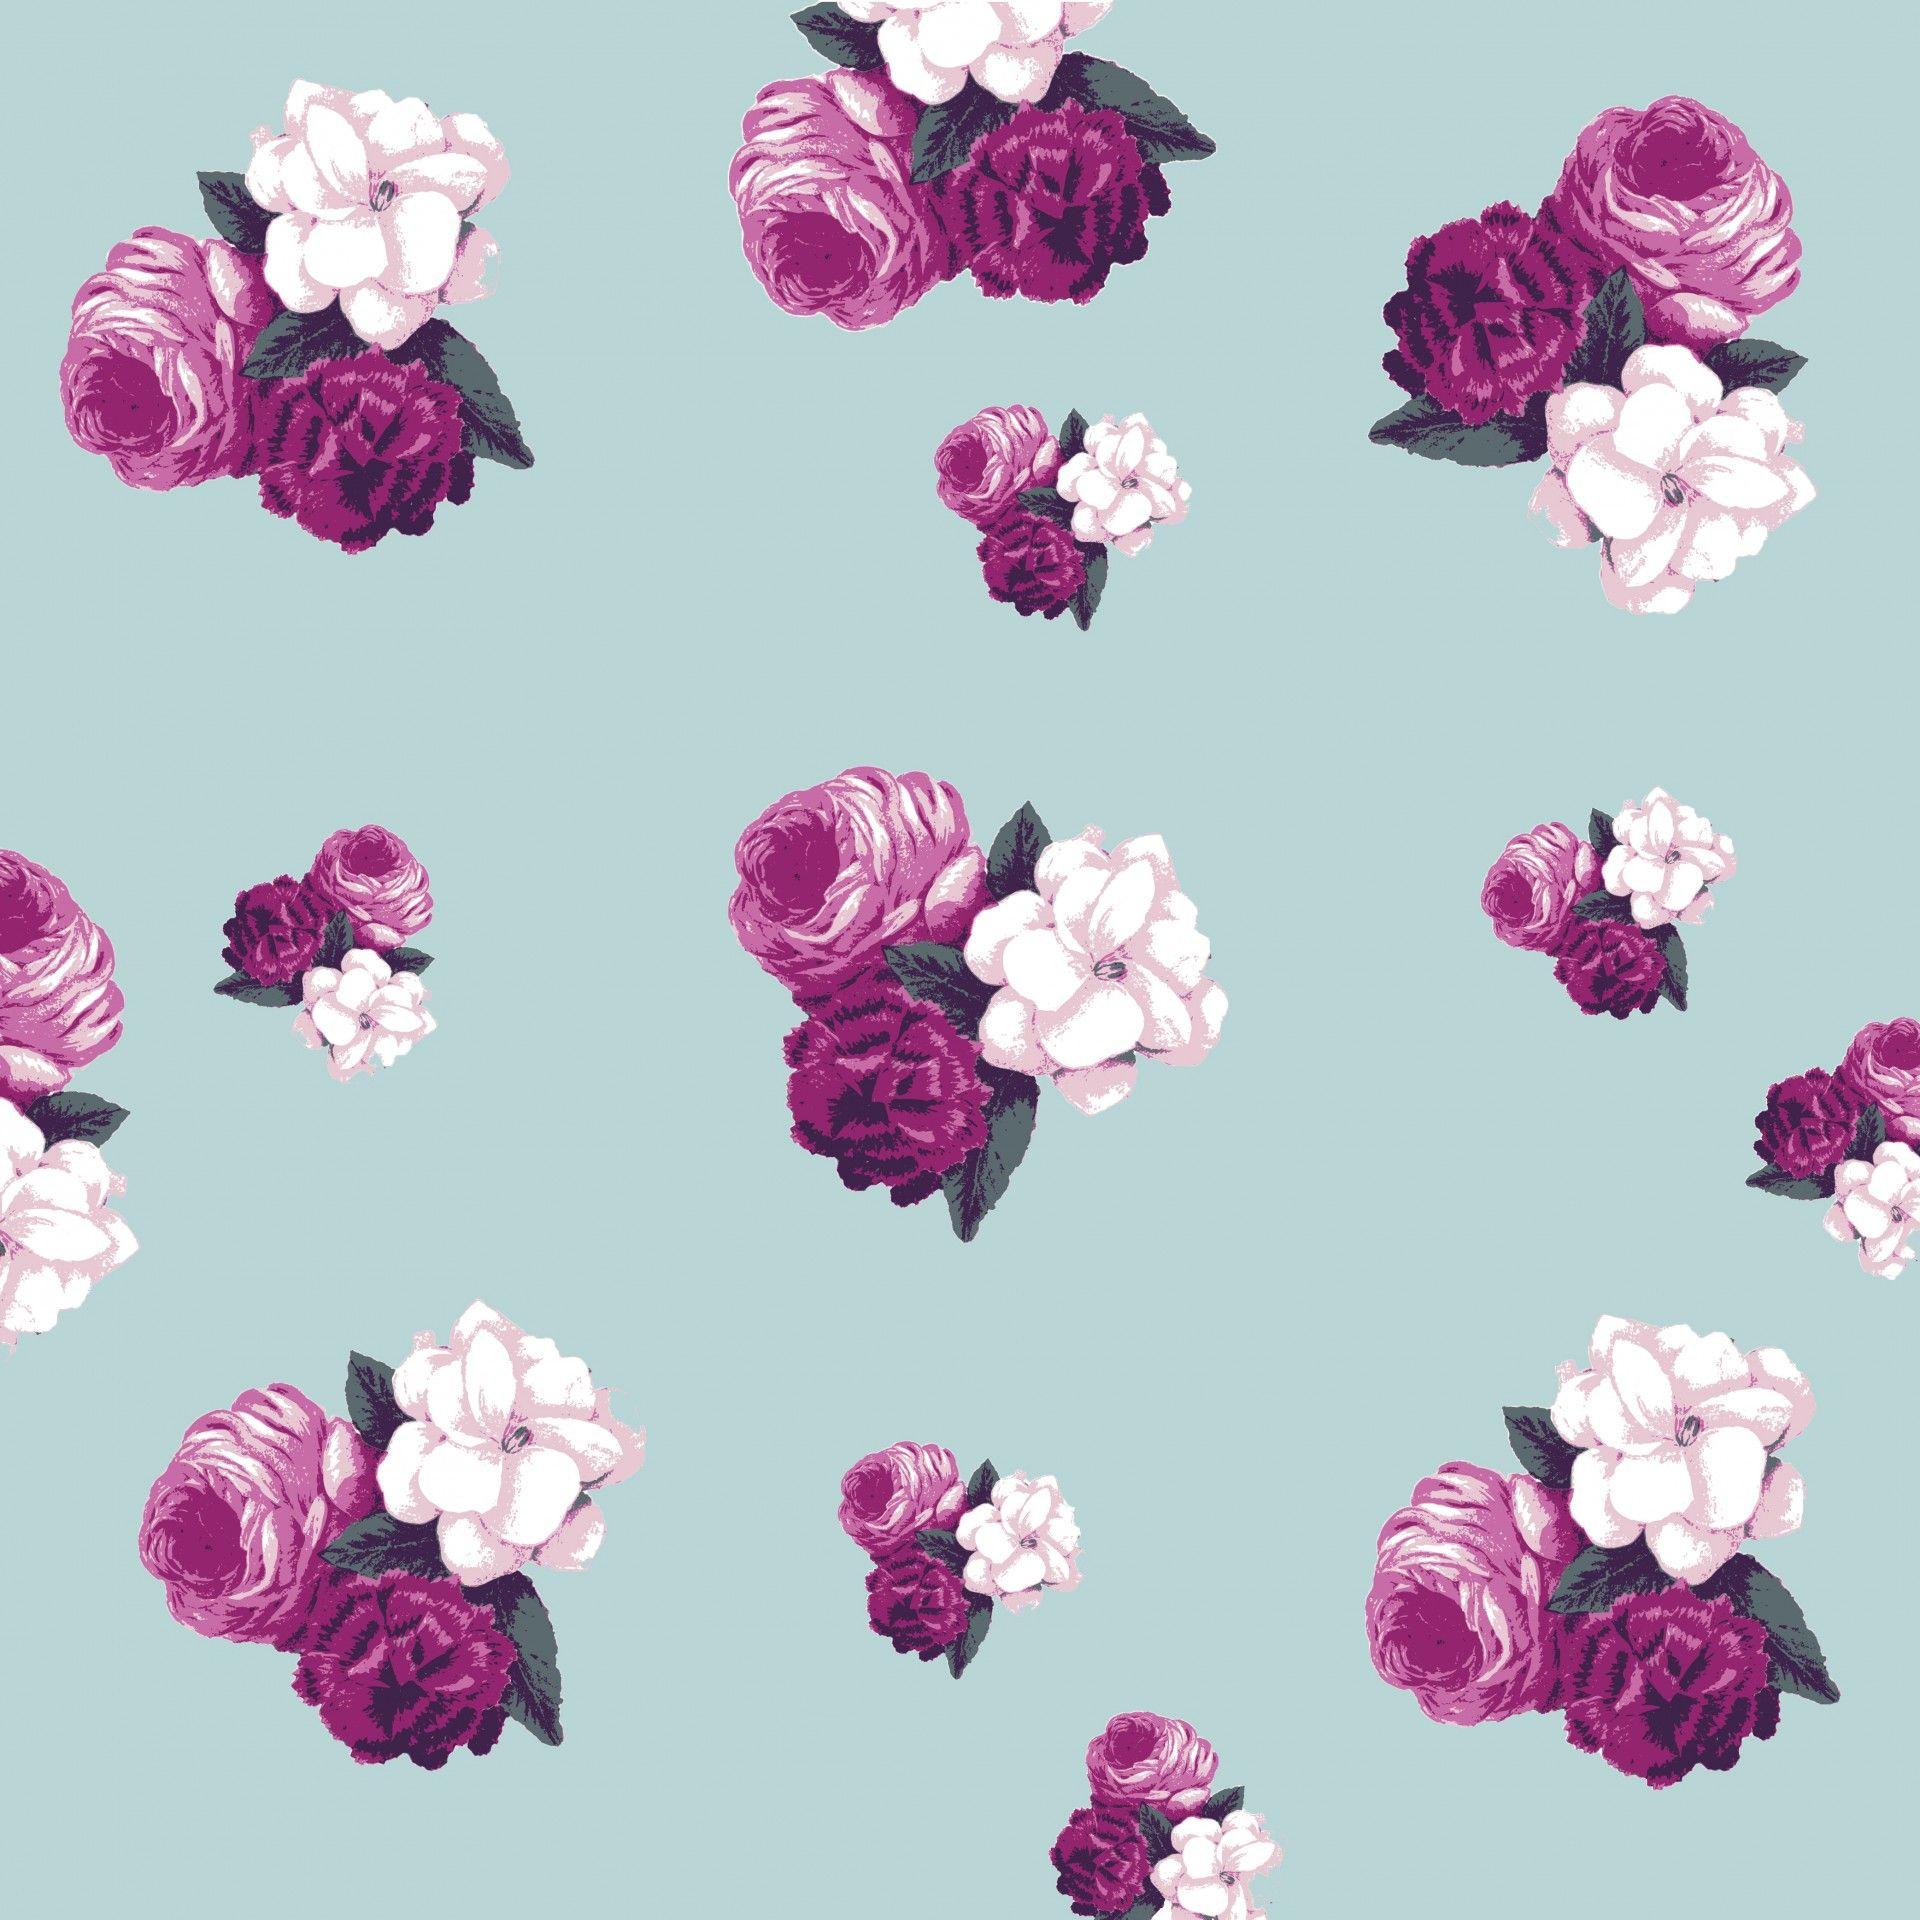 Vintage Floral Roses Wallpaper Free Domain Picture